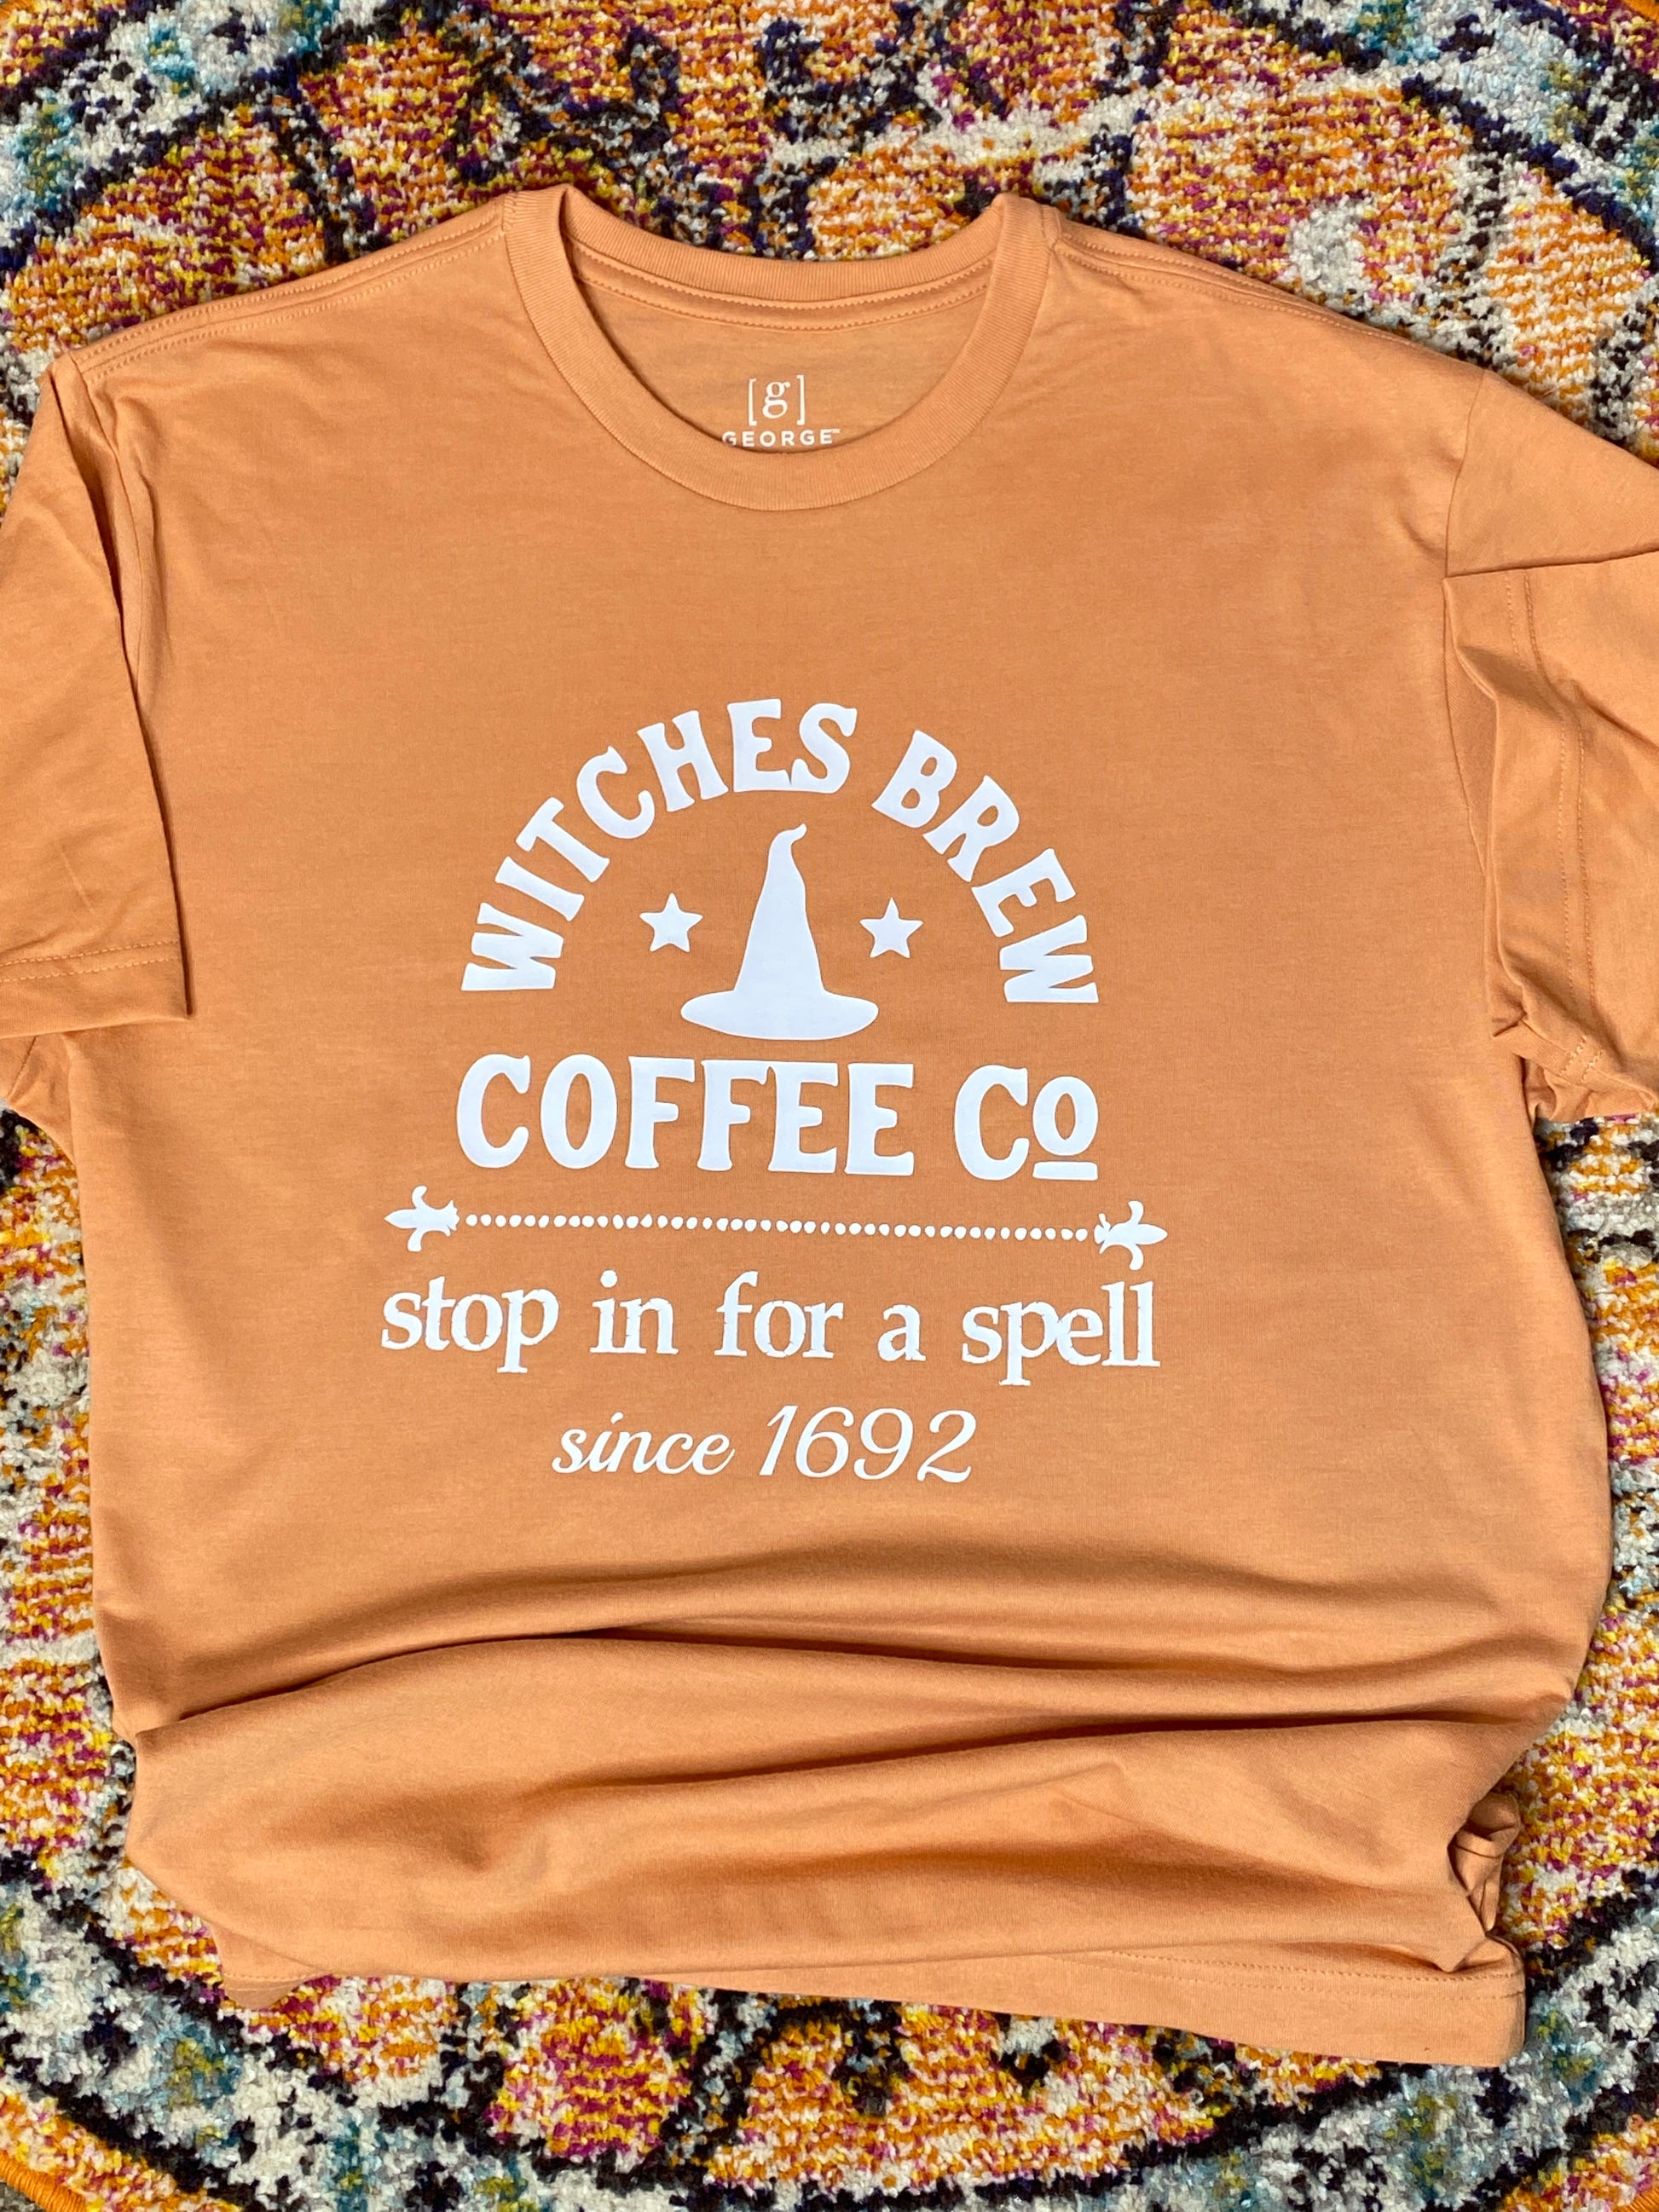 One Left! Witches Brew Coffee Co Shirt - Binnie & Bopper Designs